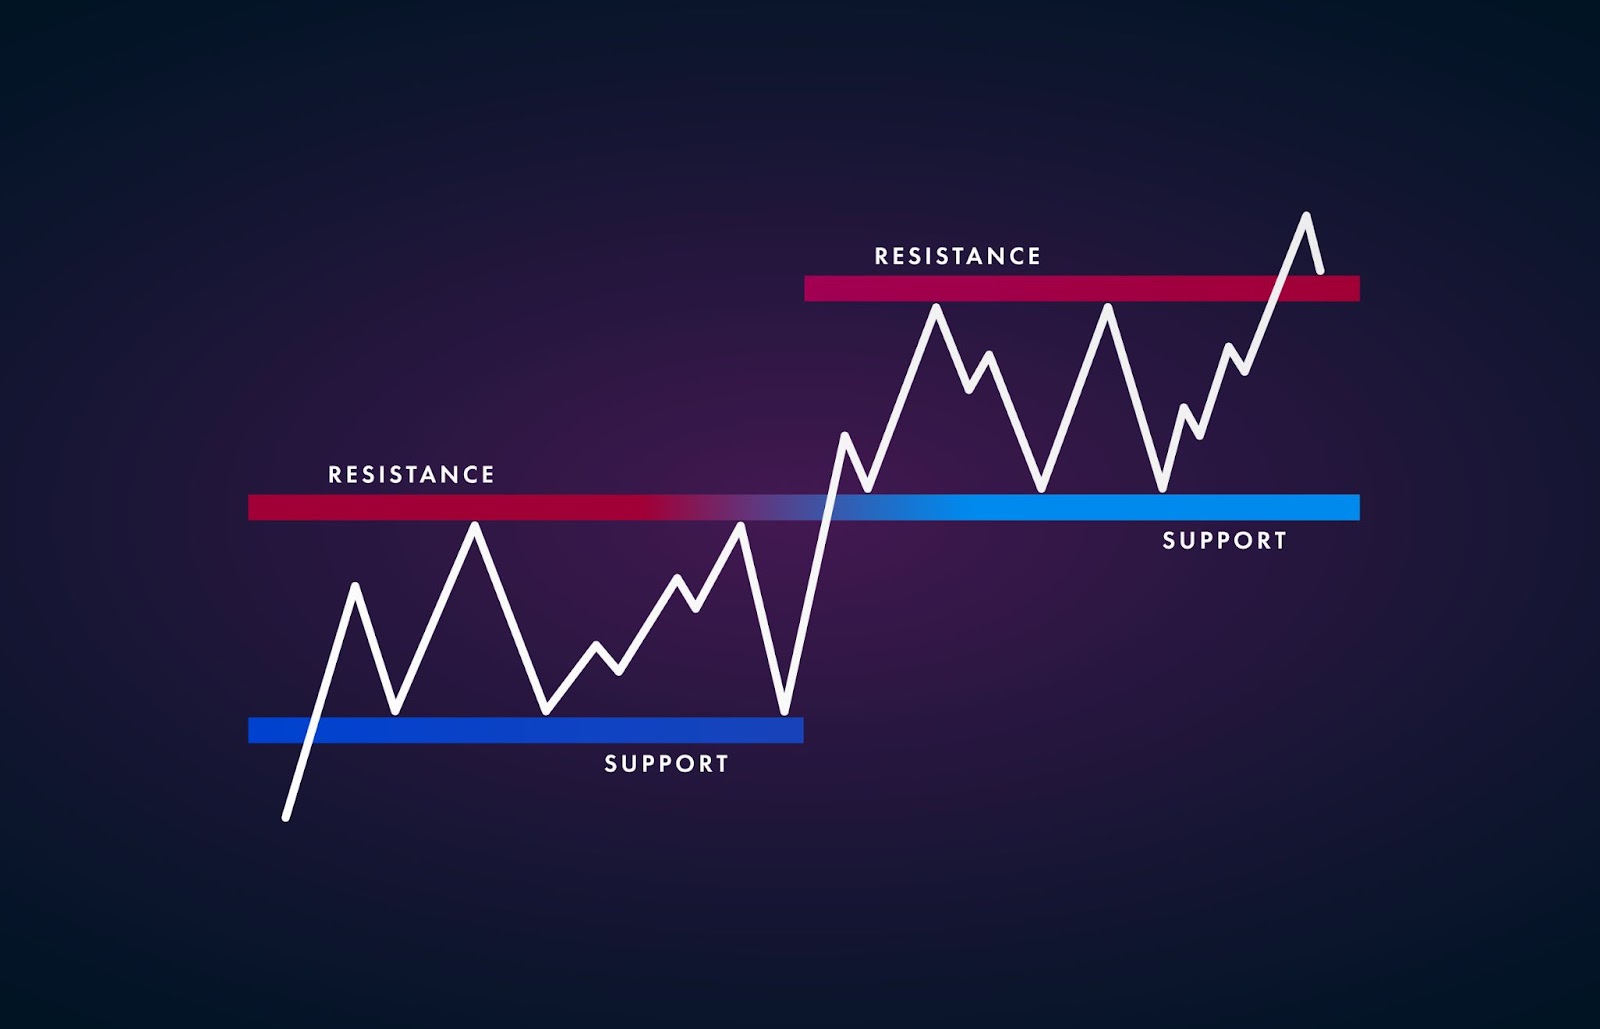 A graph showing support and resistance levels